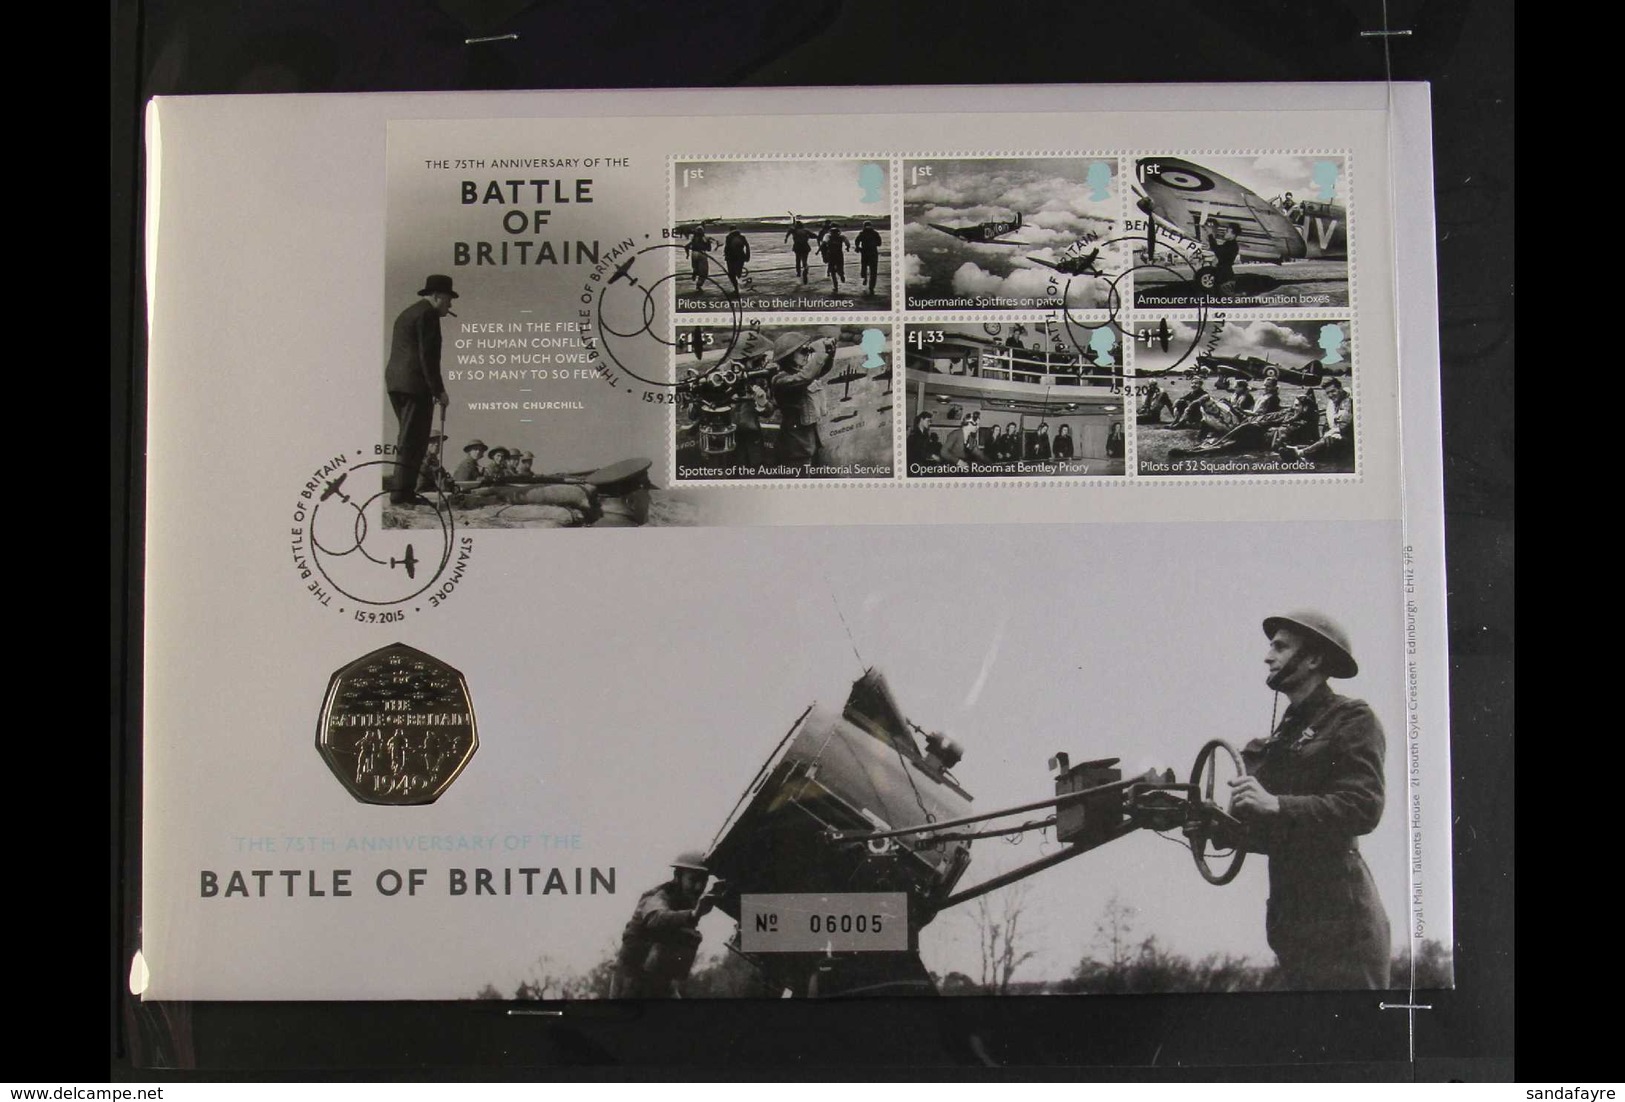 1995-2015 WORLD WAR II COIN COVERS A Collection Of Ltd Edition Royal Mint "COIN COVERS" Commemorating The End Of WWII. I - FDC